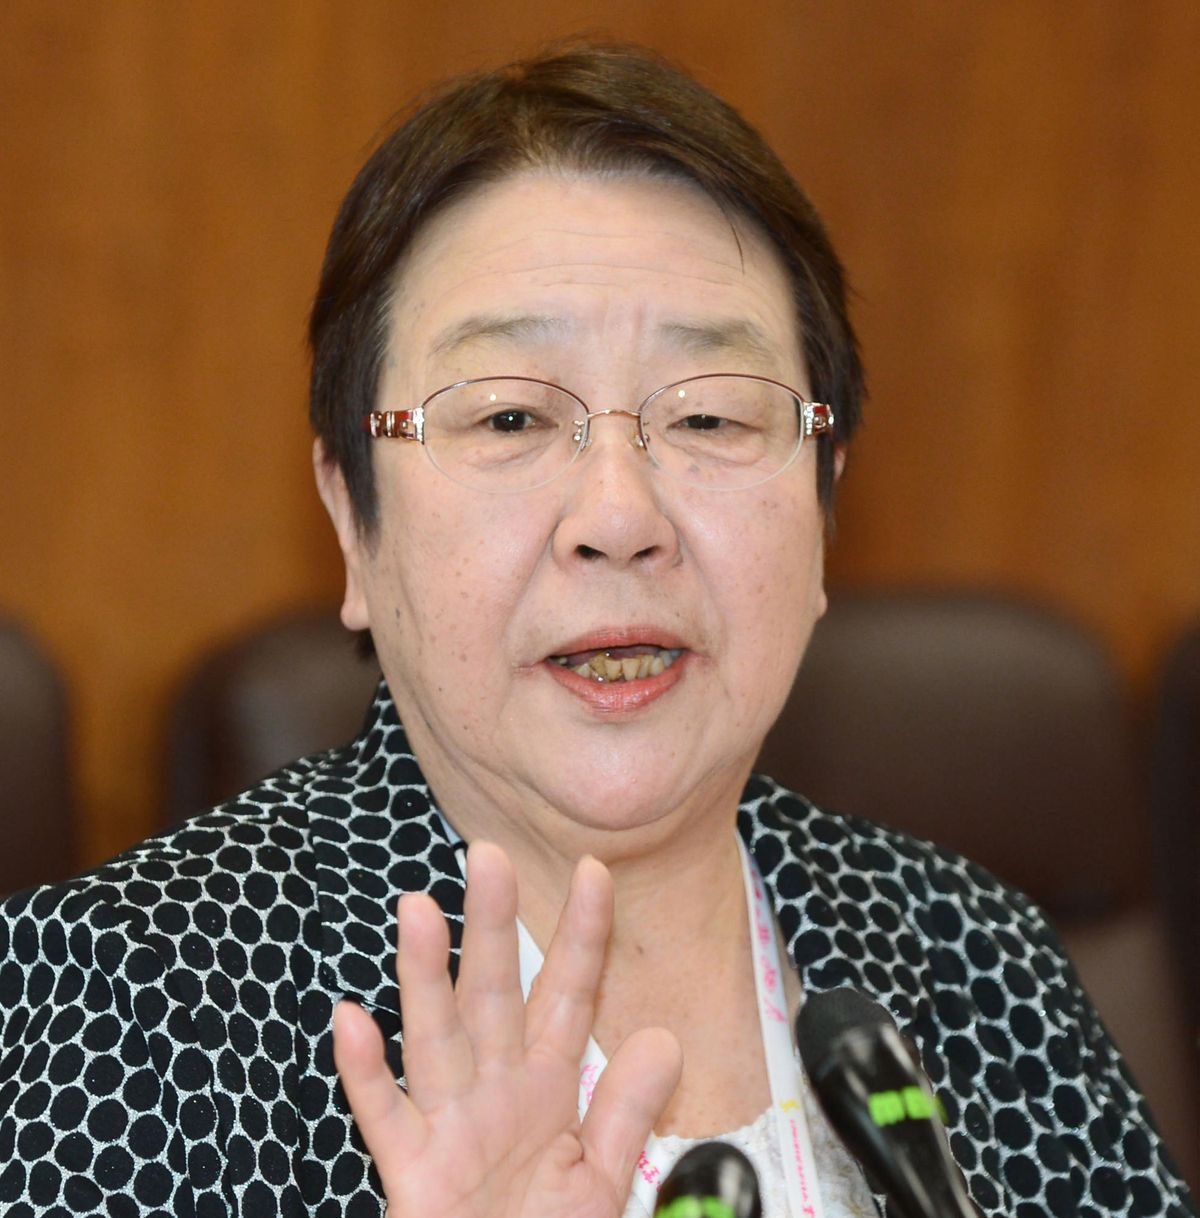 Tomoko Nakagawa, mayor of Takarazuka City, speaks to media in Takarazuka, Friday April 6, 2018. A female mayor in western Japan has protested sumo’s male-only tradition in her speech she was forced to make outside of the ring – unlike her male counterparts who go inside – seeking a change. (Yoshihiko Imai / Associated Press)